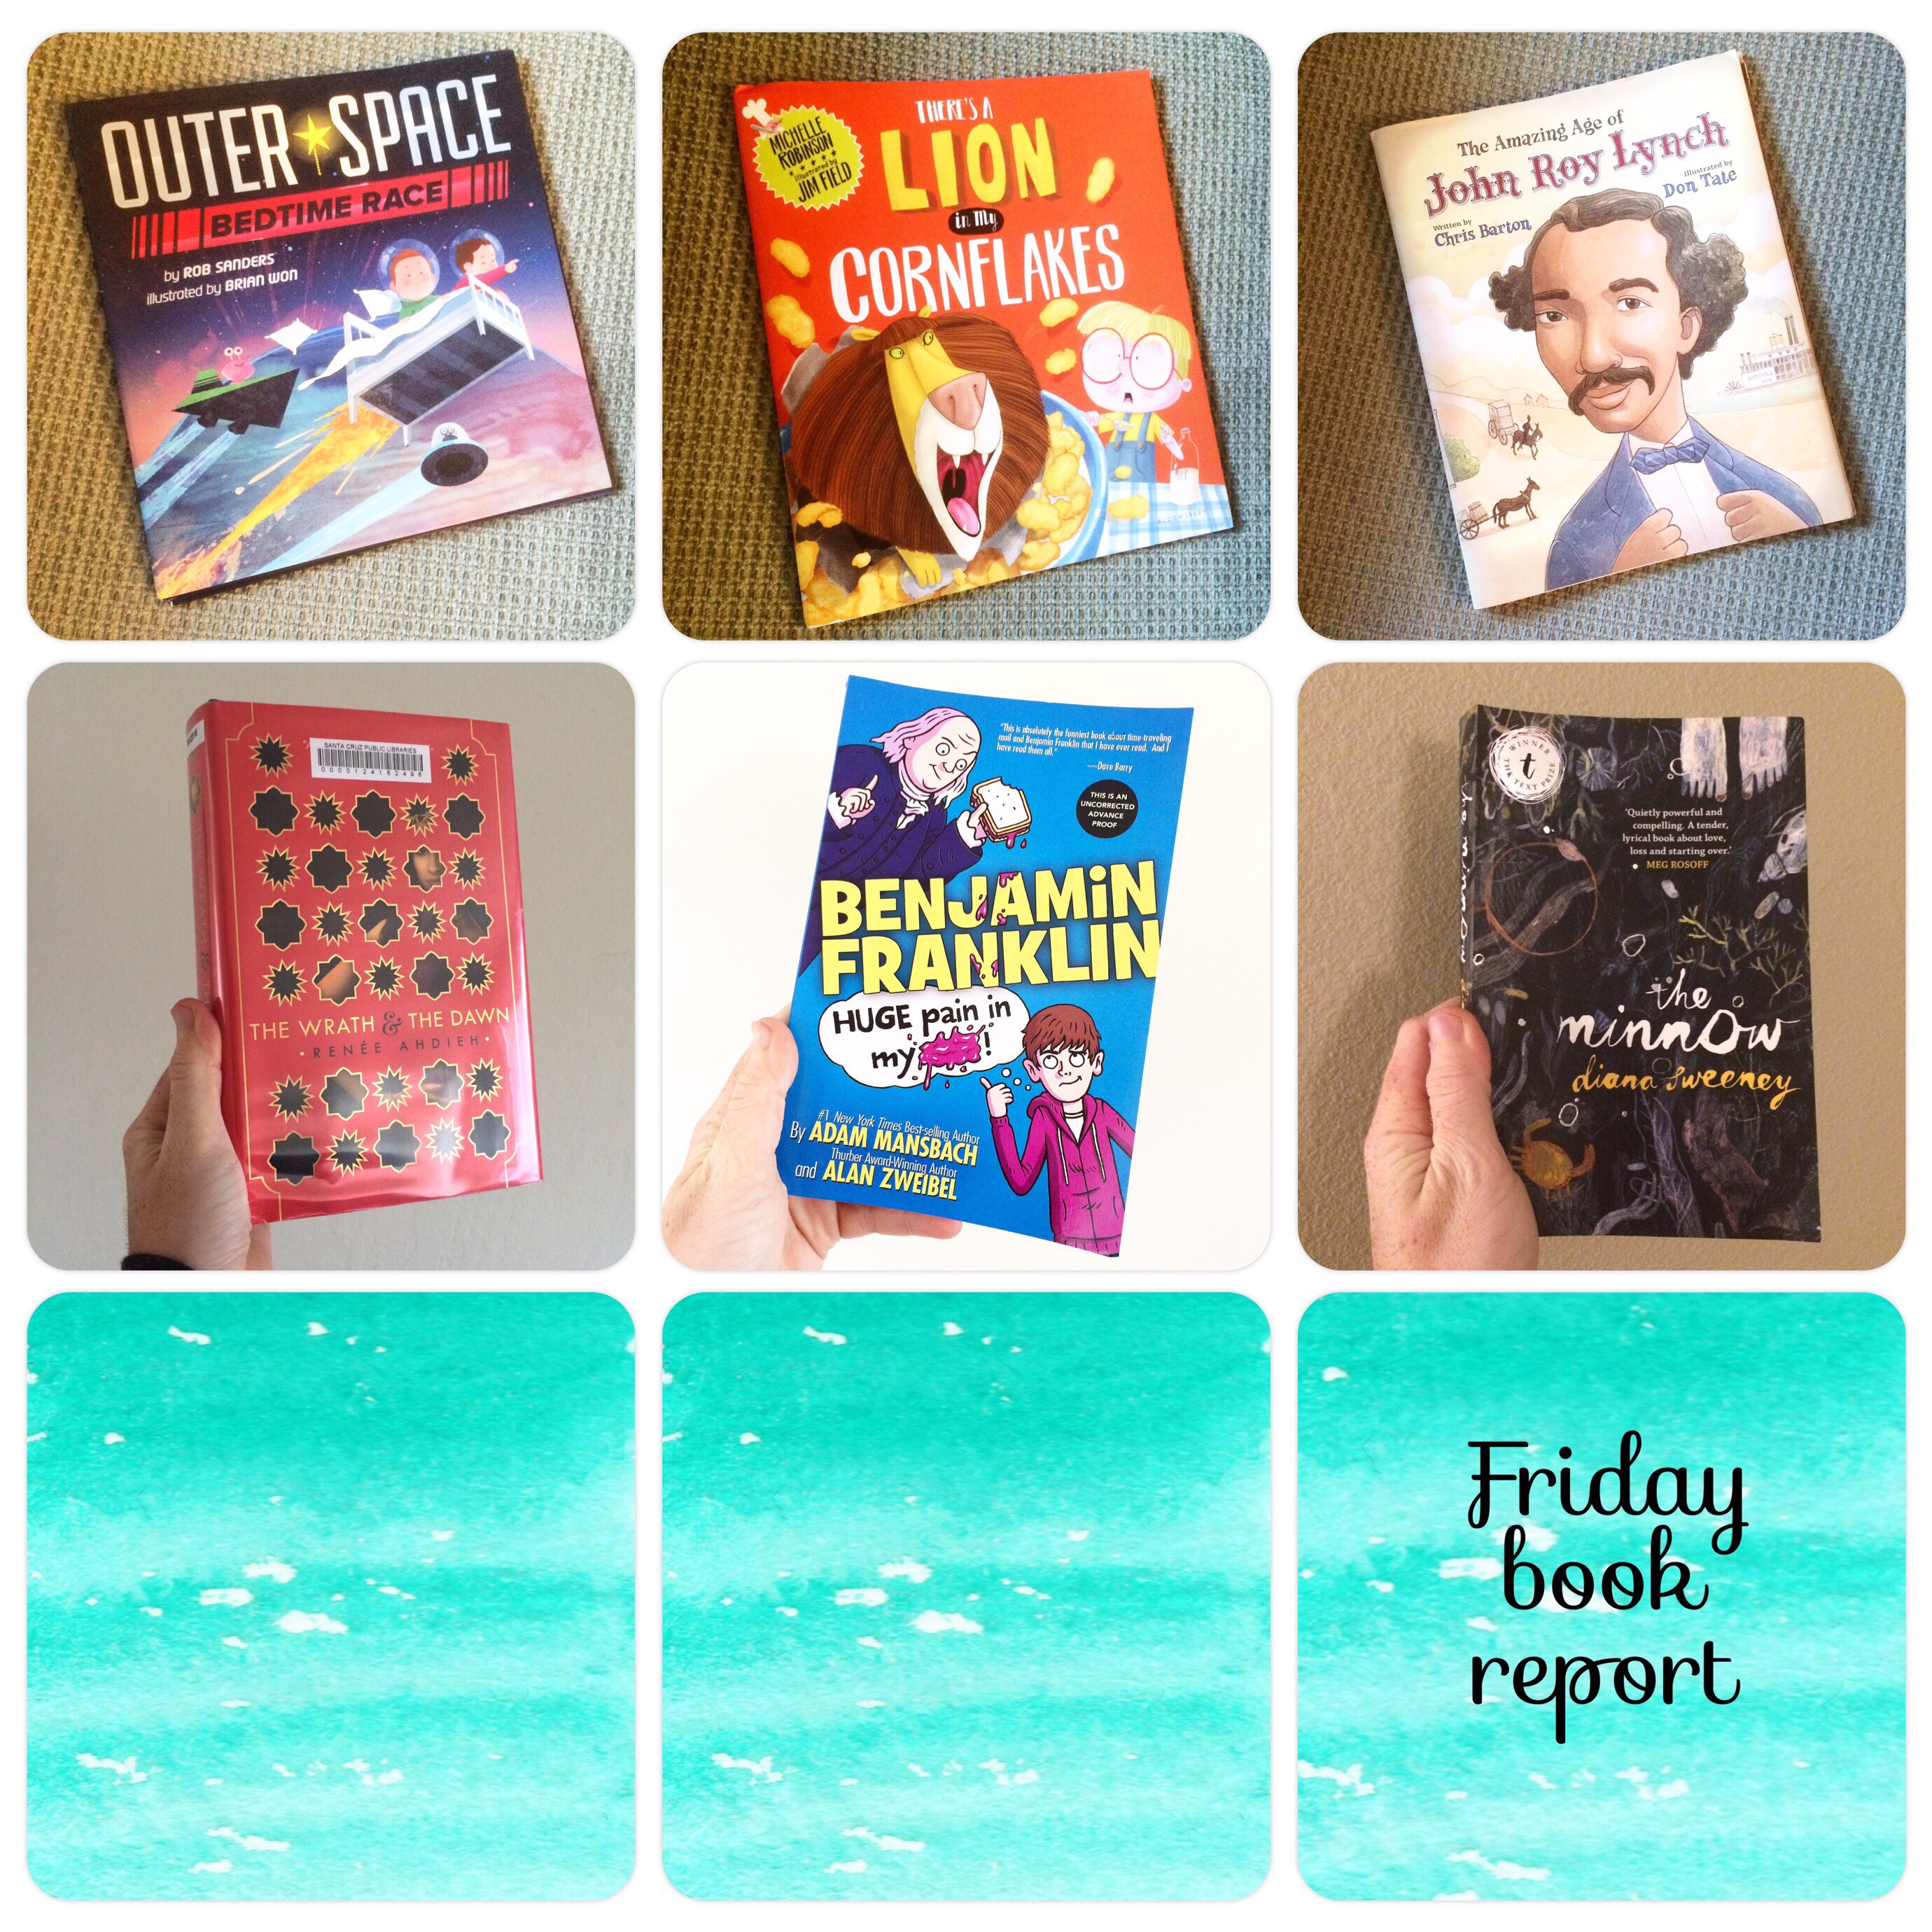 Friday Book Report 7